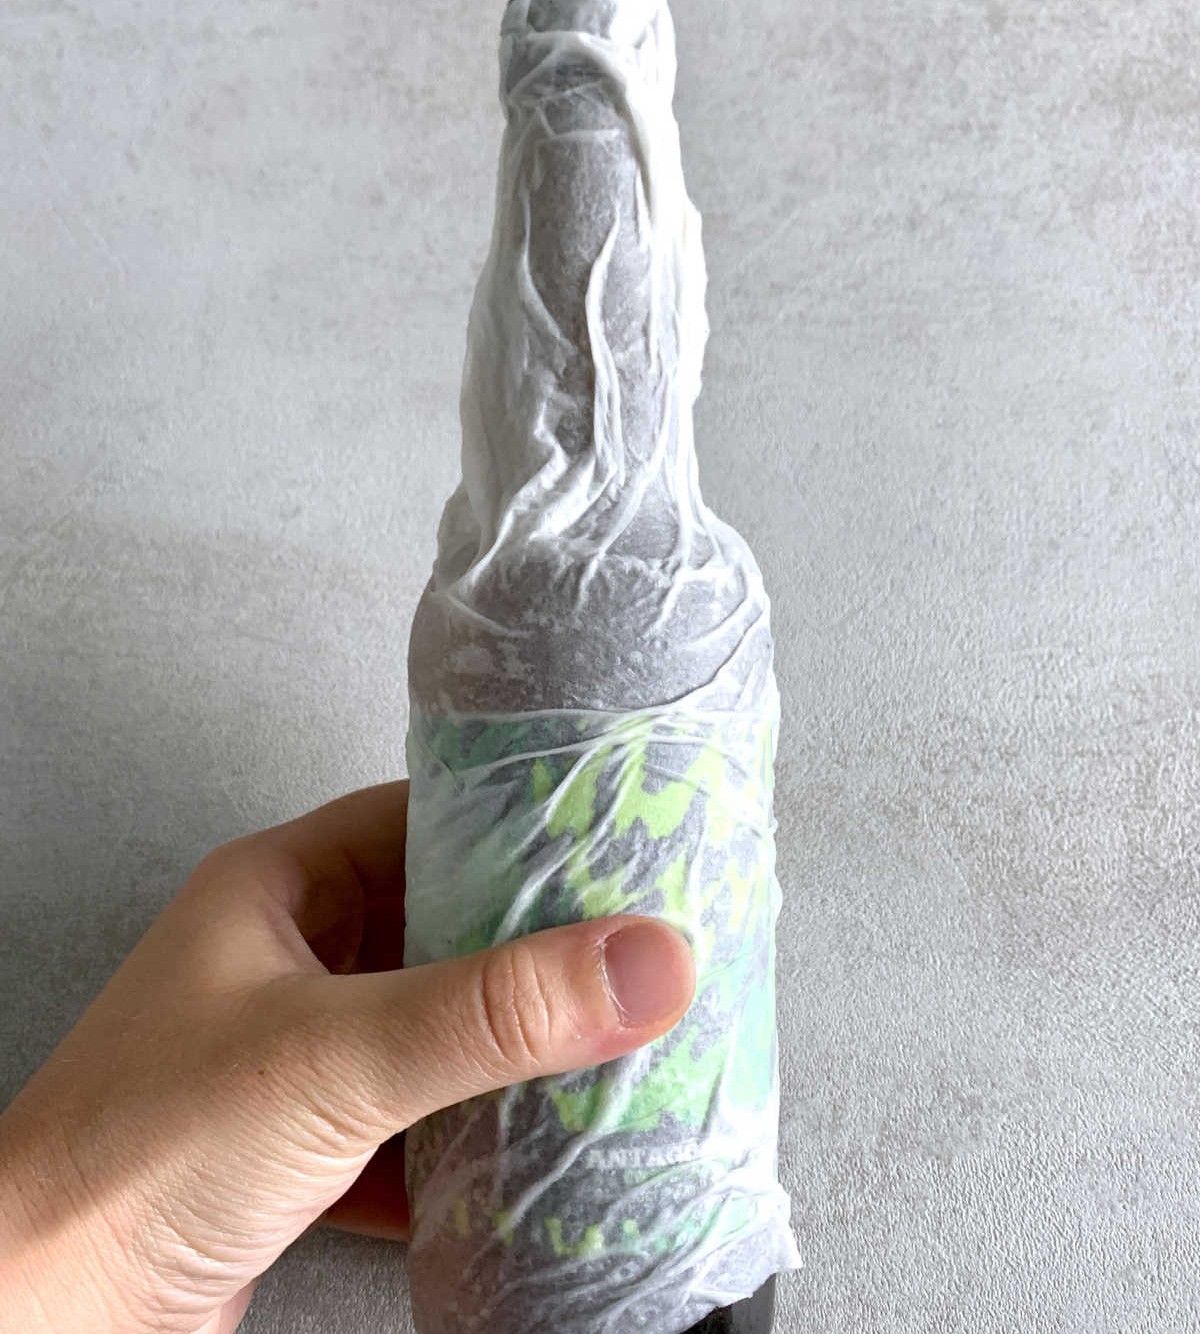 Wrap Your Drink in a Wet Napkin for Quick Cooling